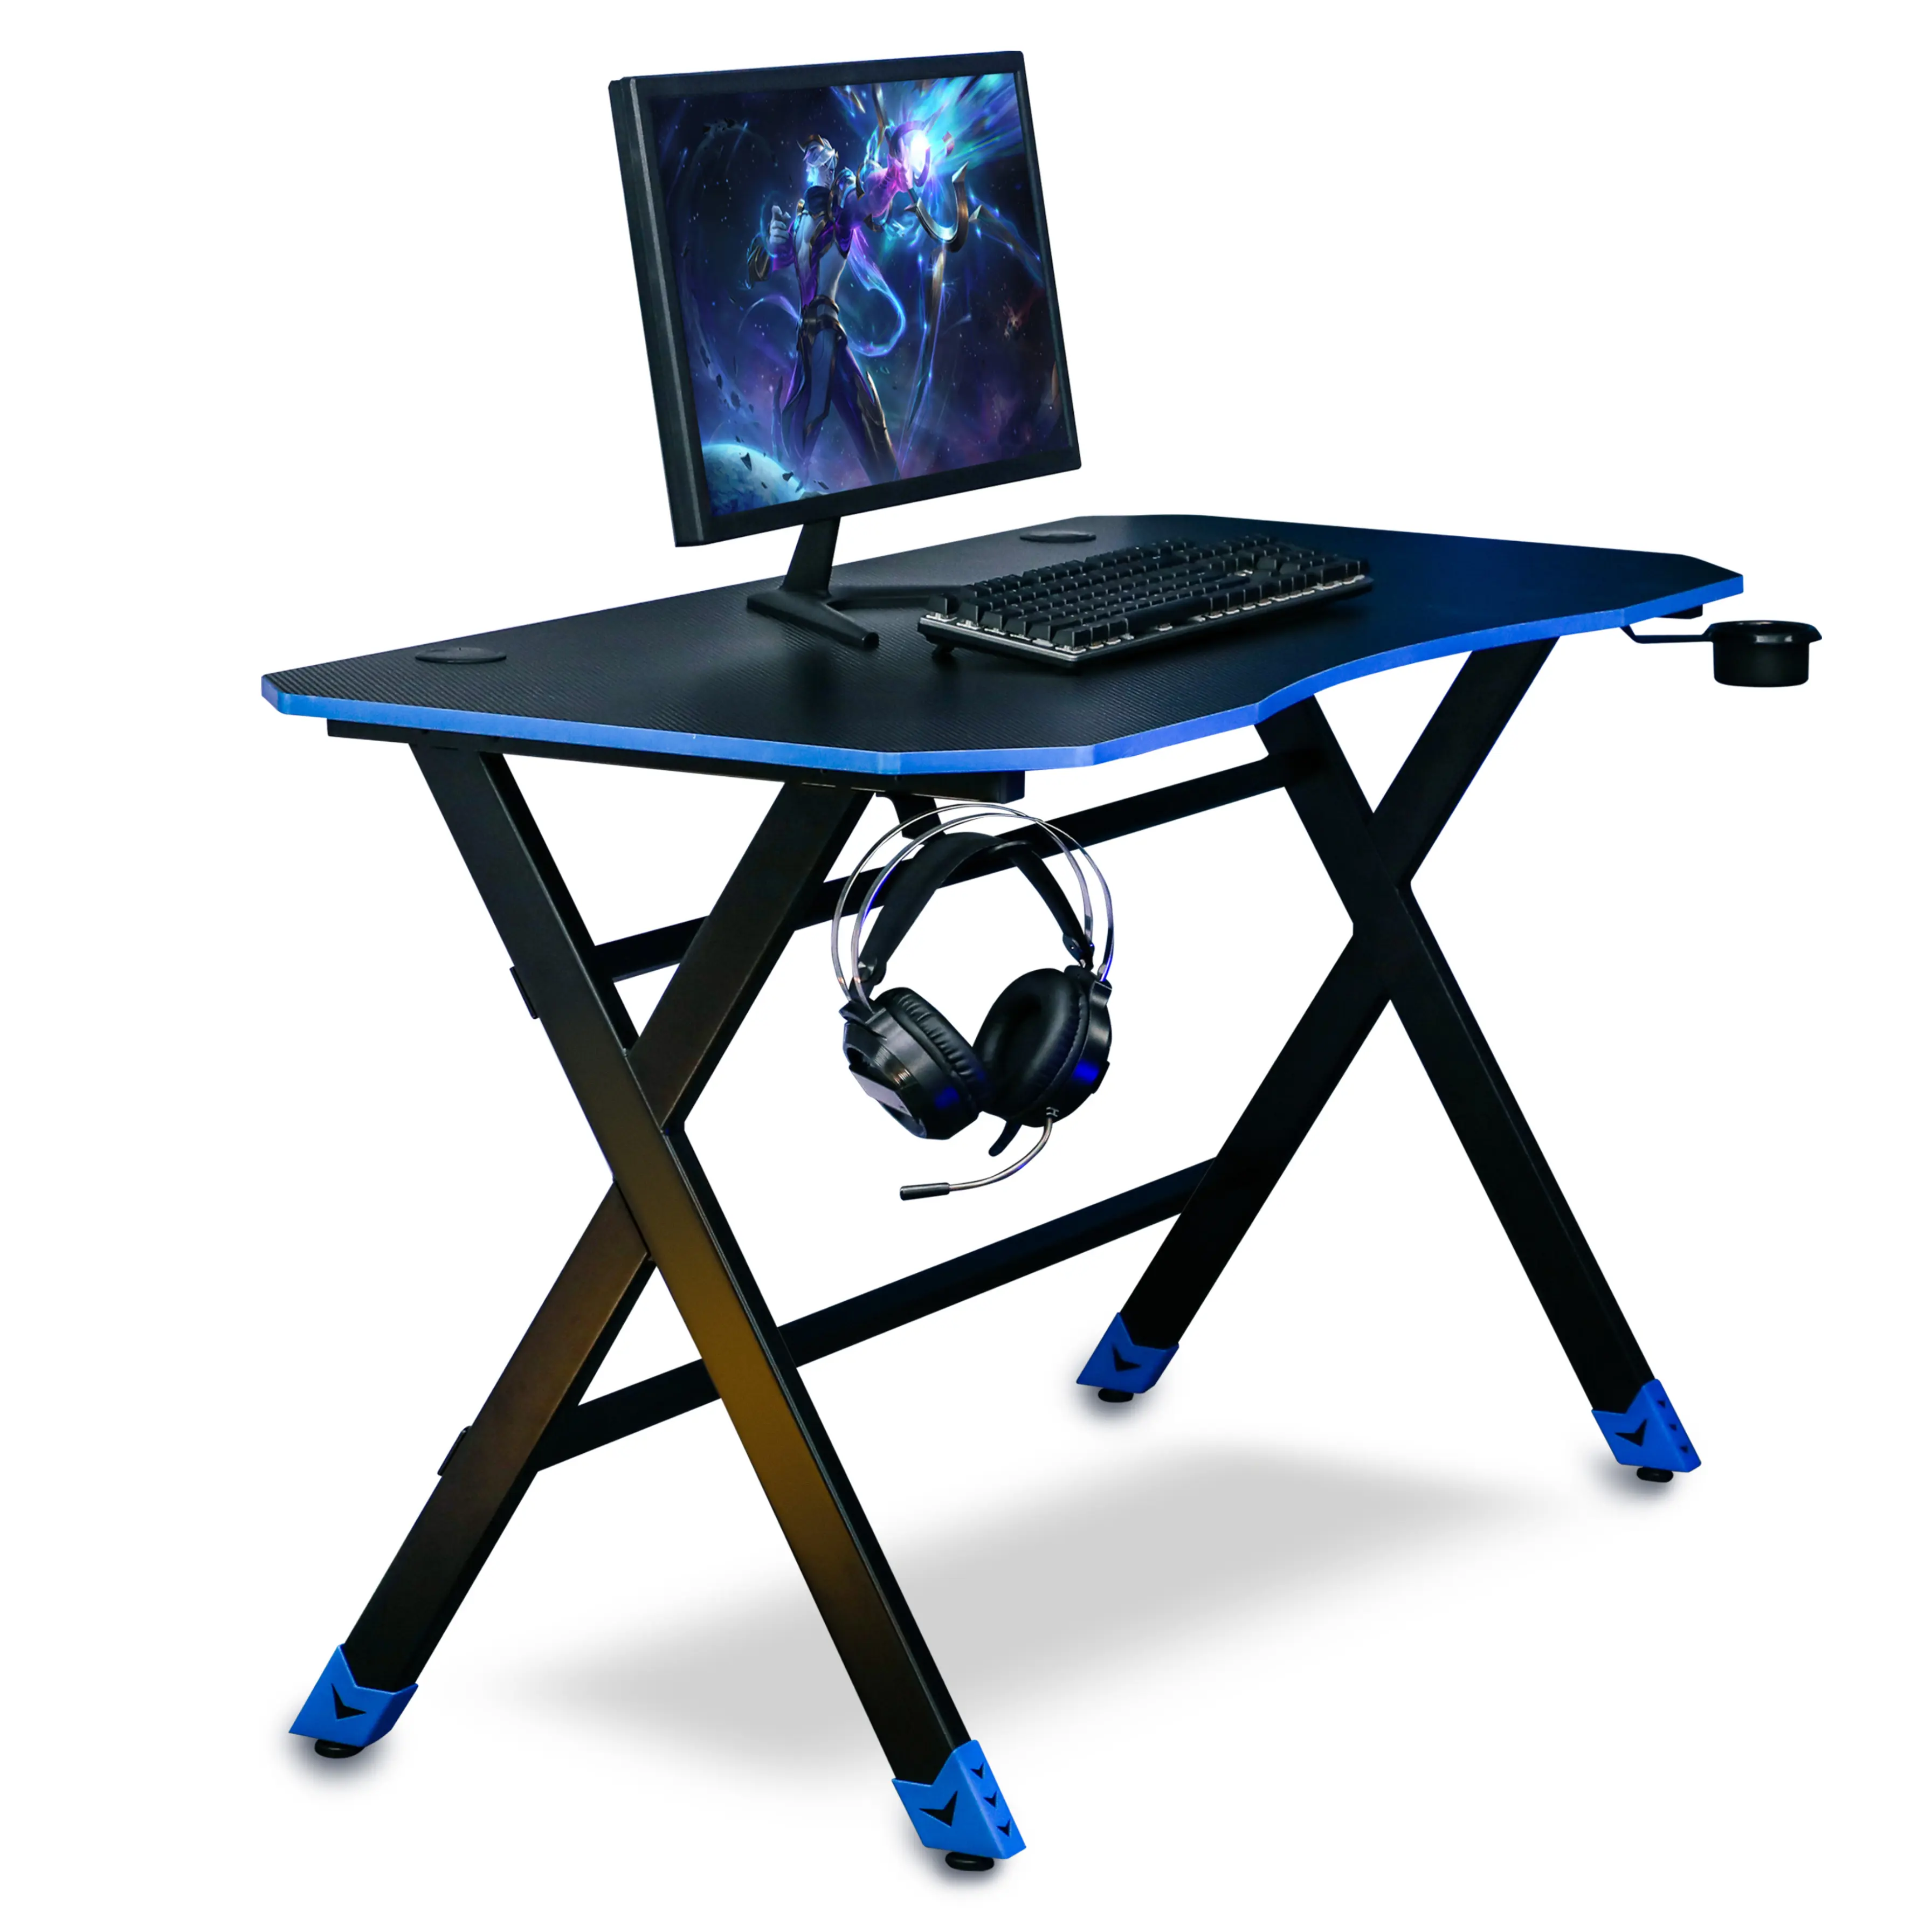 High Quality OEM ODM Office PC desk office screen workstation small office cubicle Computer Gaming Desk